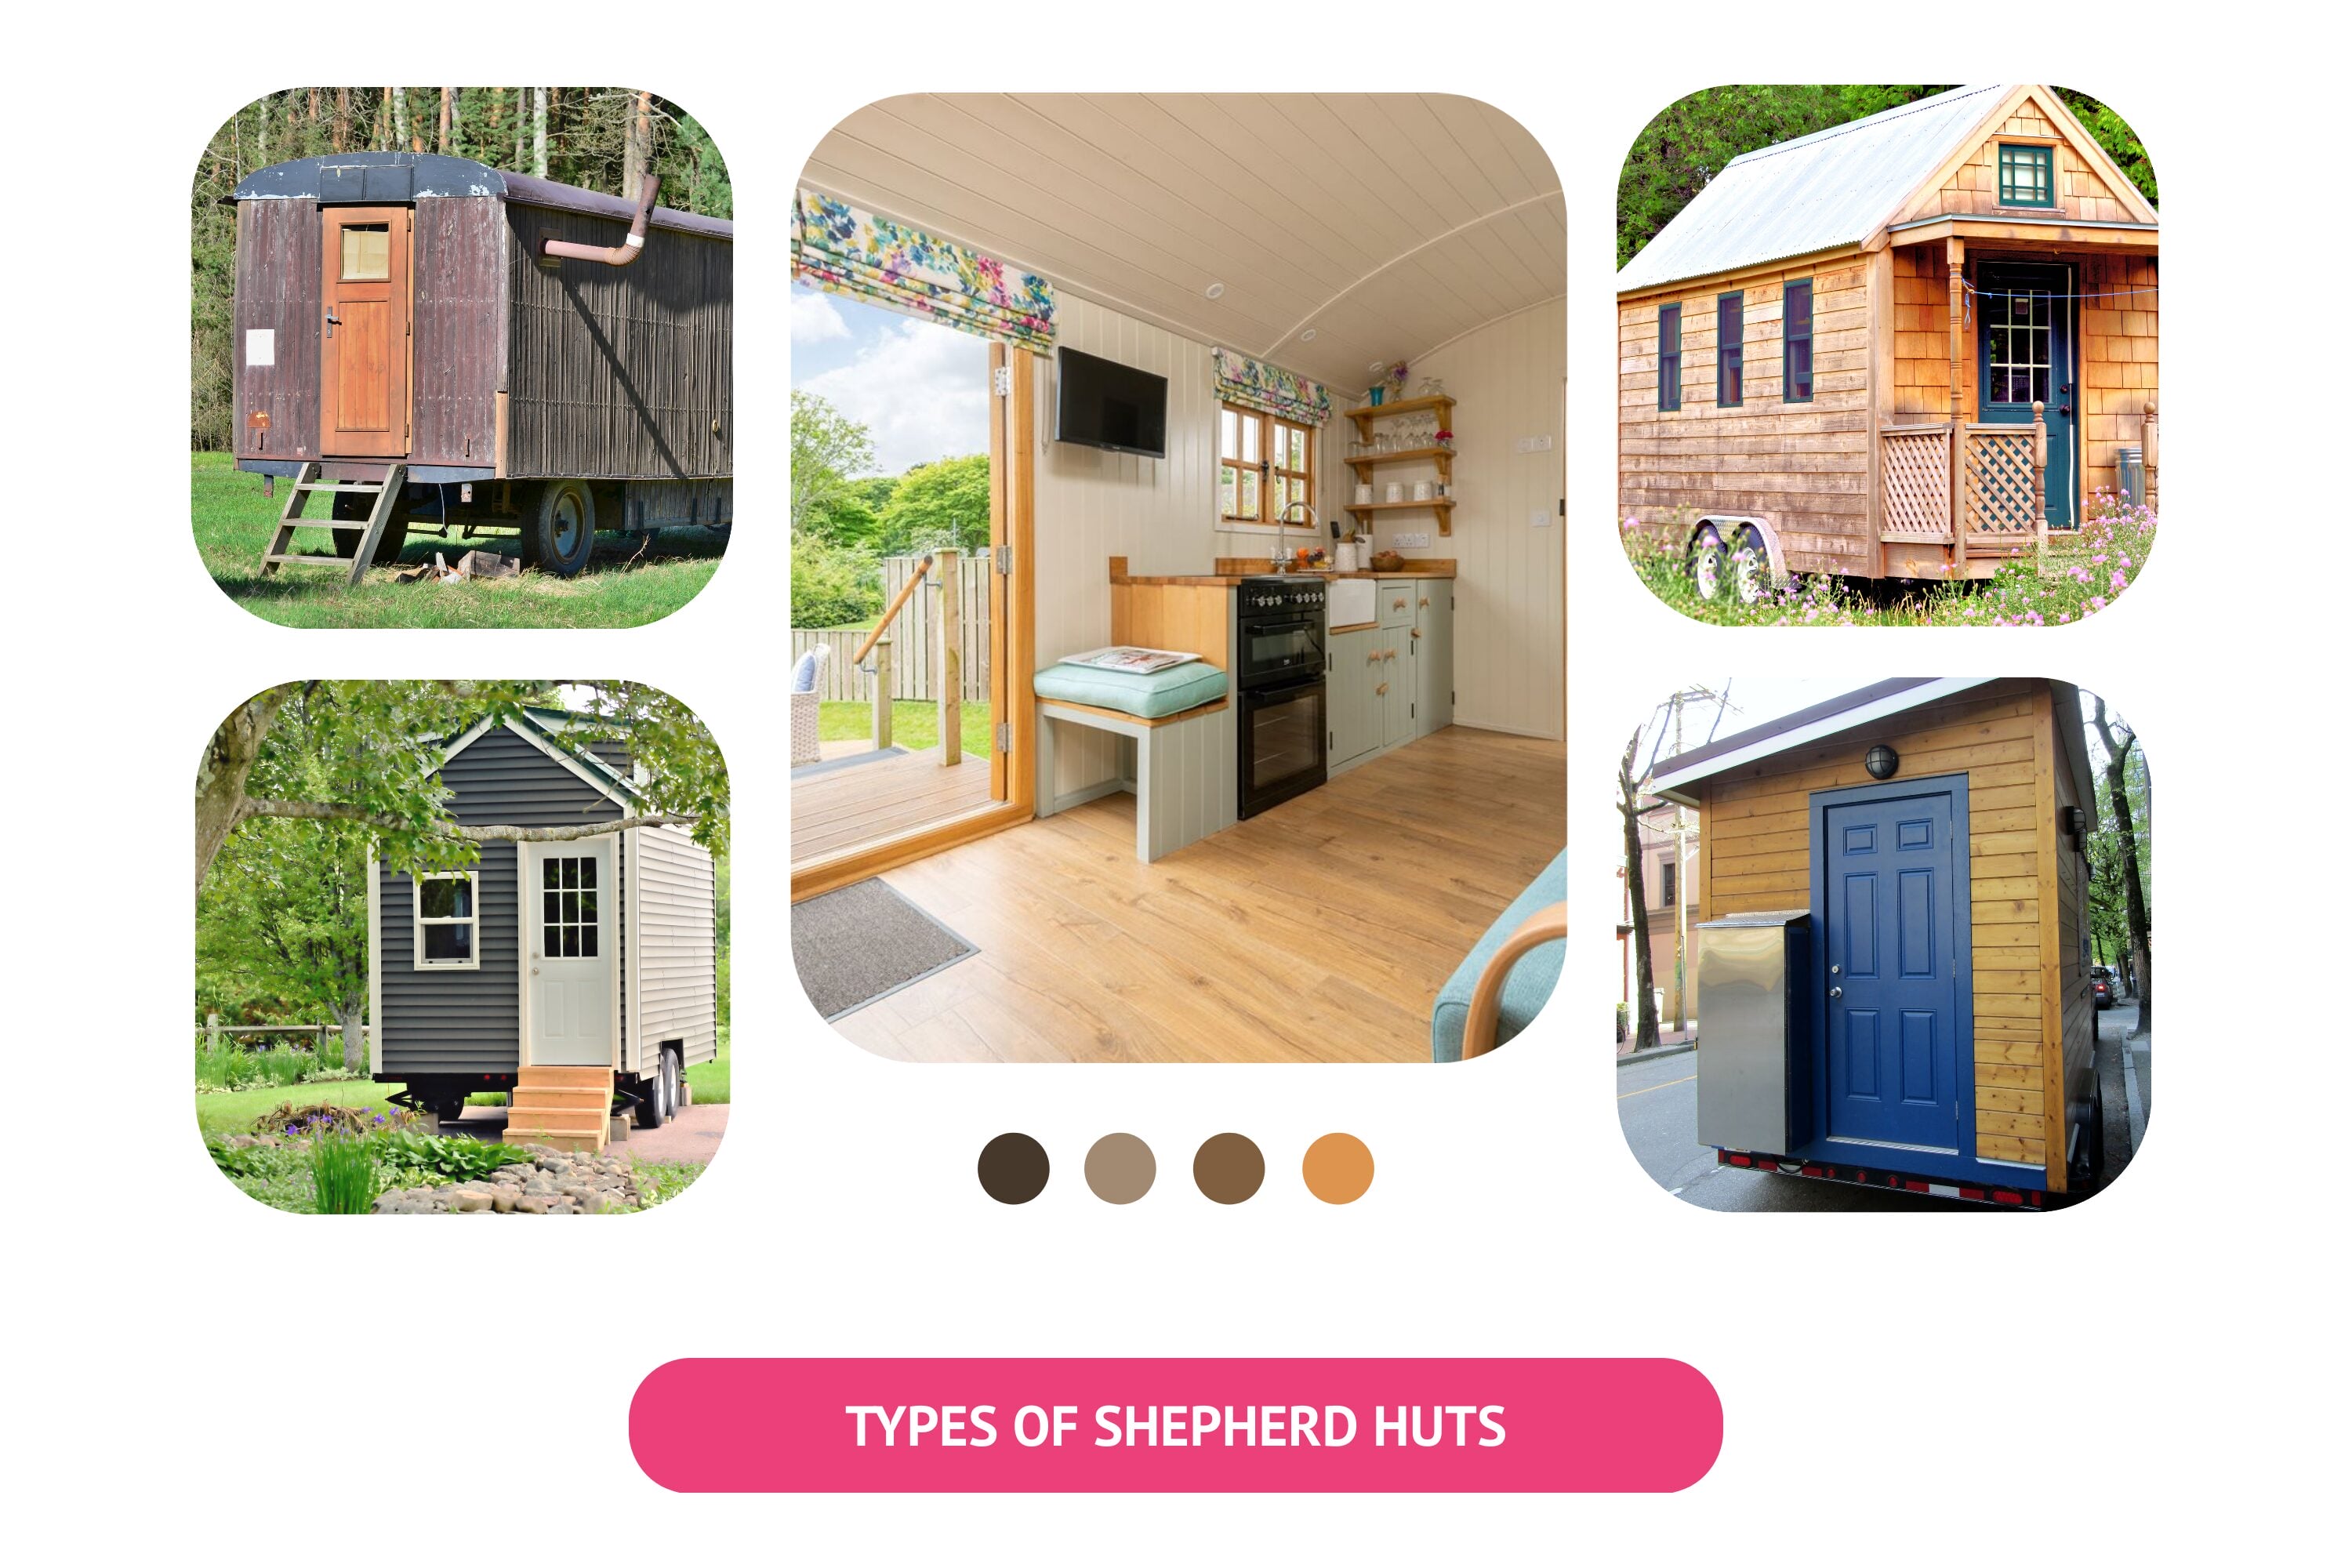 There are various types of shepherd huts available for you to choose from.